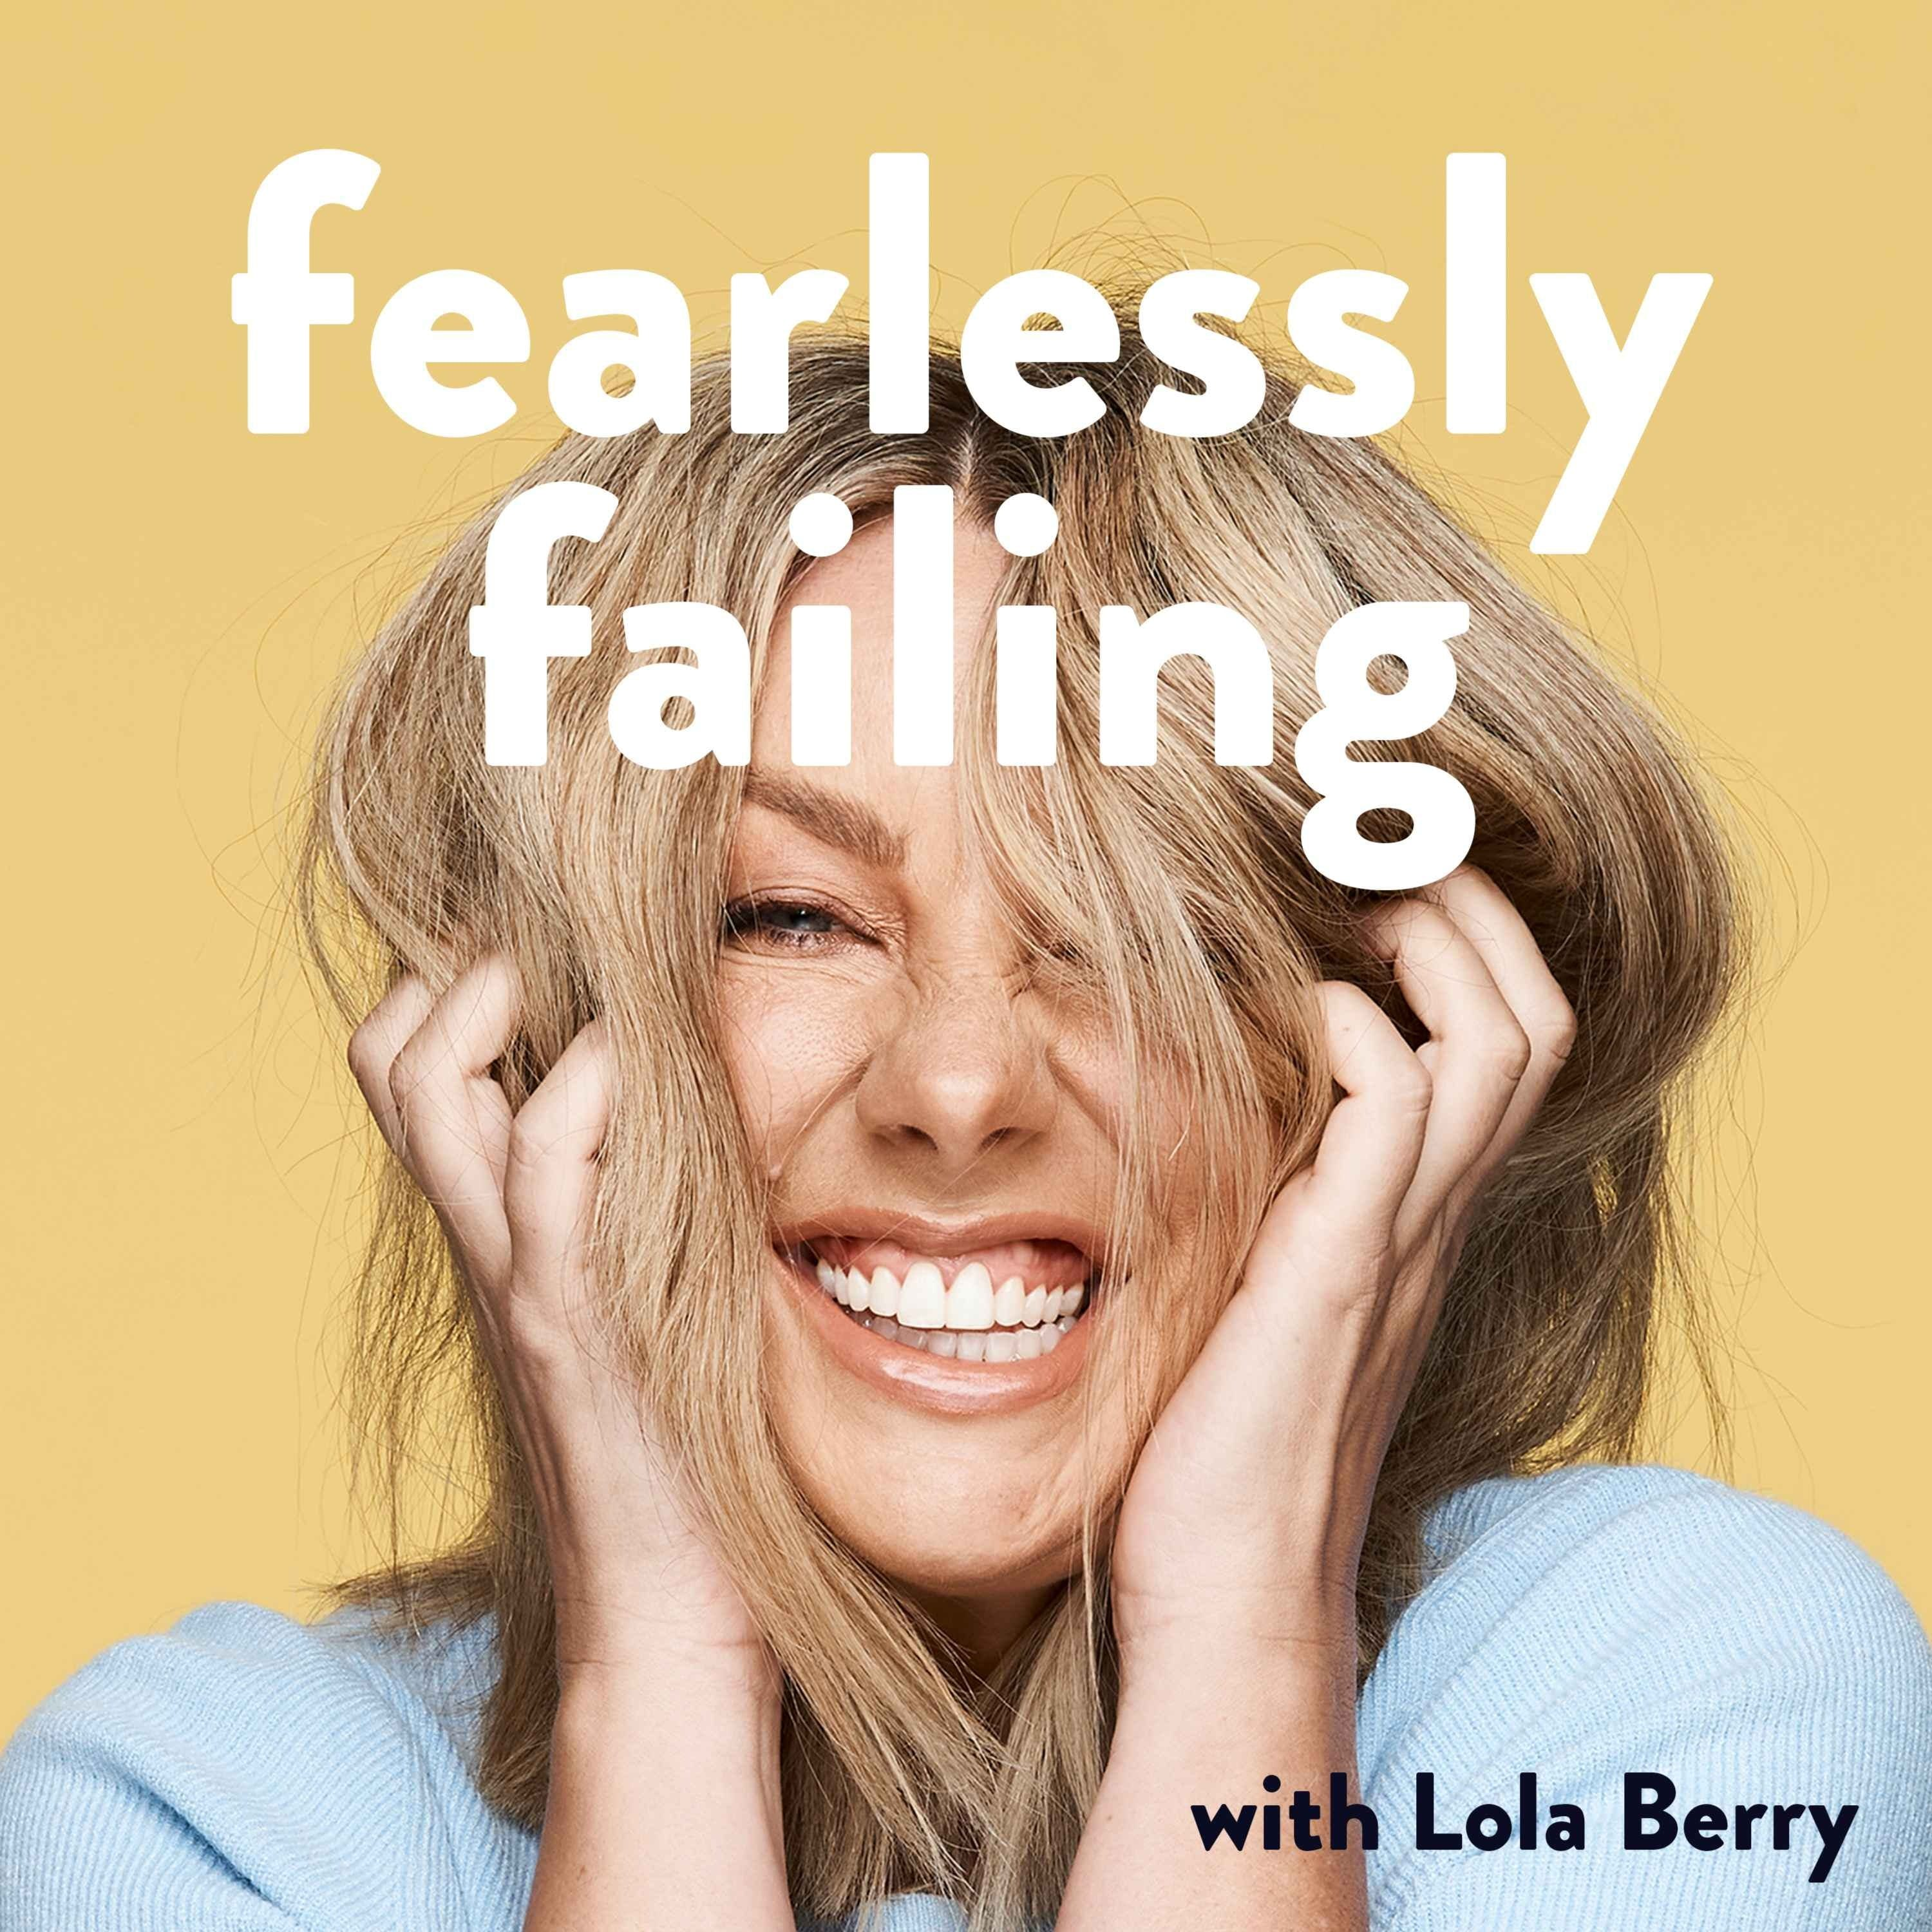 169. Fearlessly Failing: Lincoln Younes